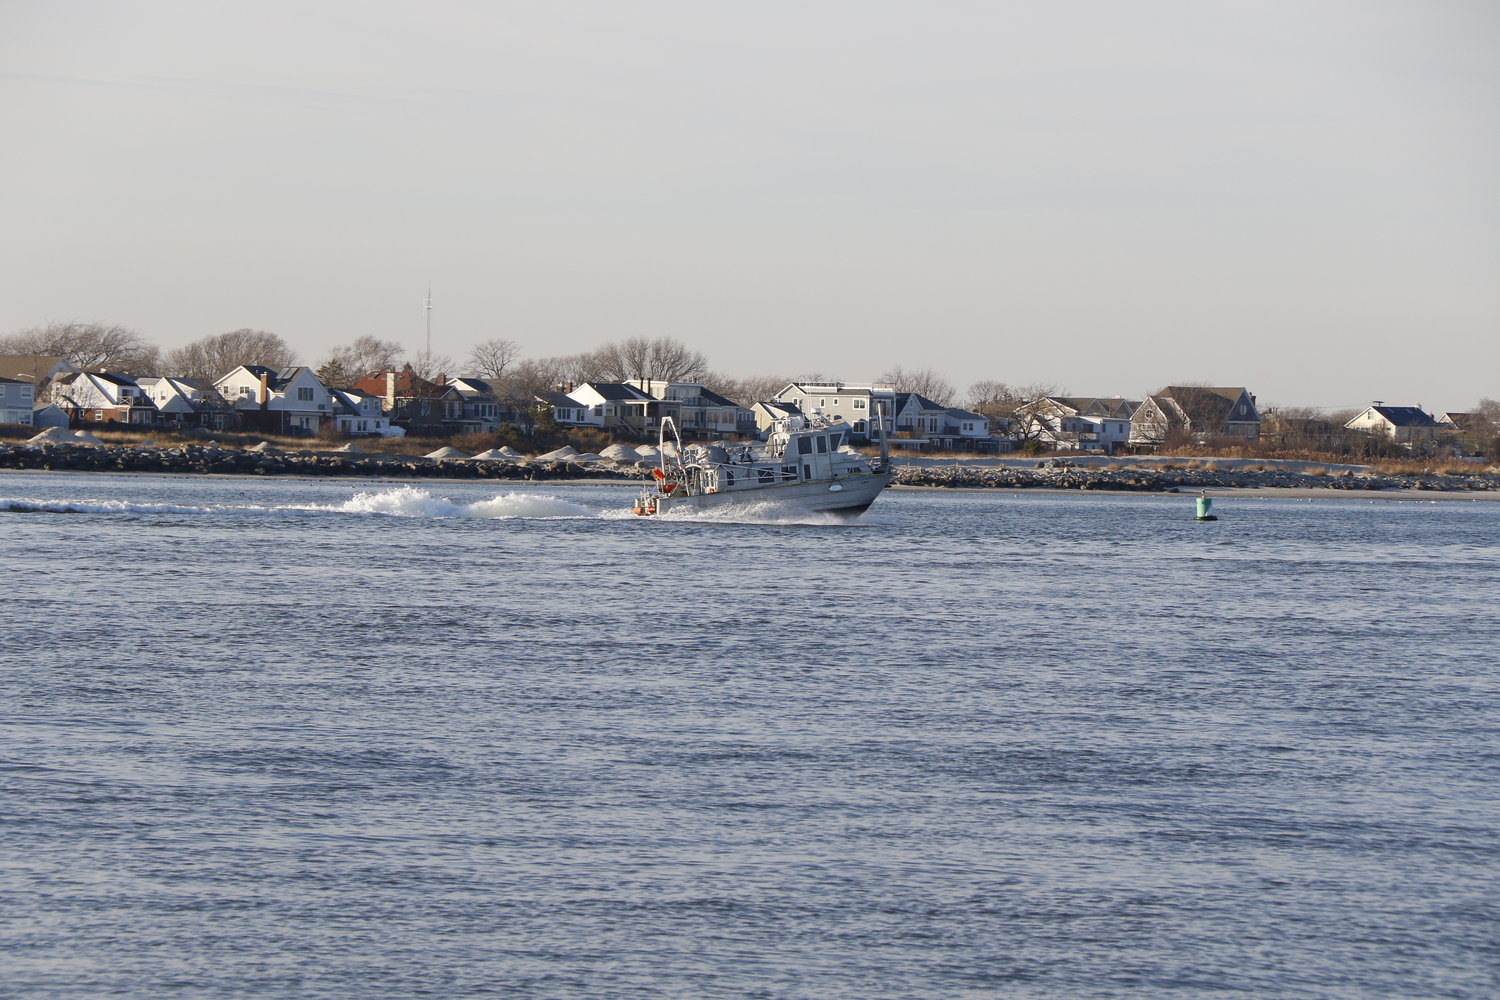 A boater skiffs across Jones Beach Inlet, which federal legislators say is in need of dredging by the U.S. Army Corps of Engineers.